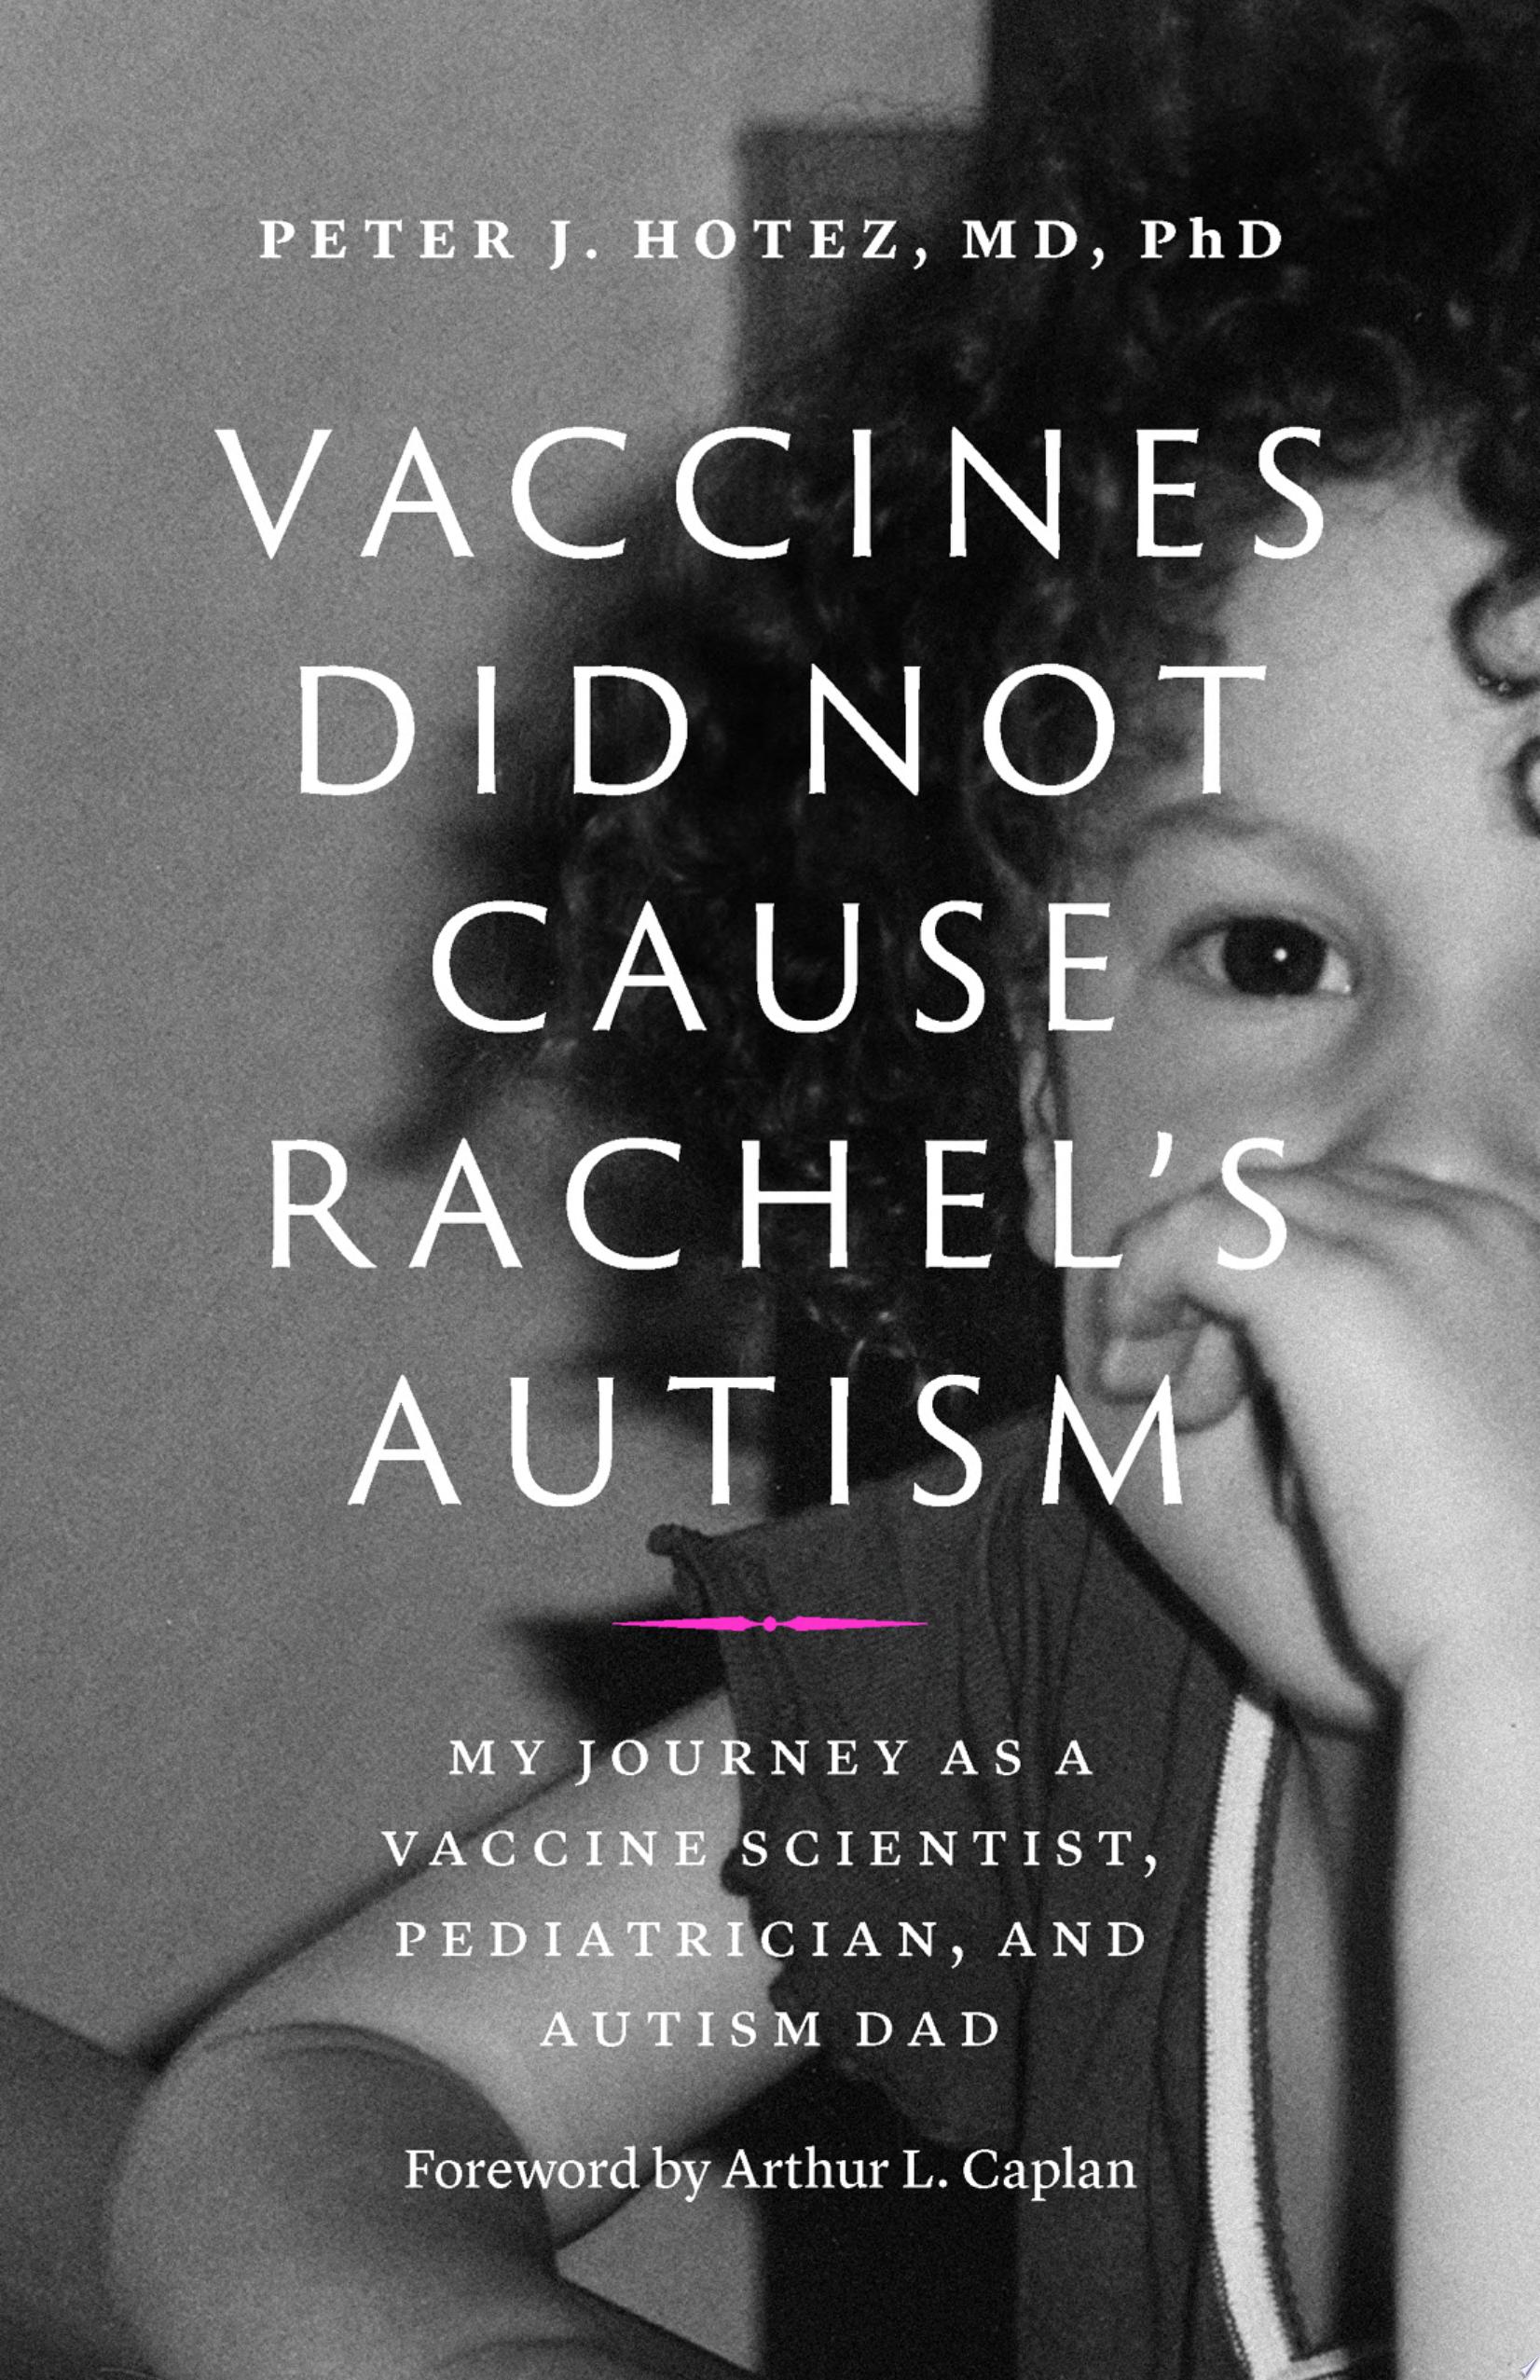 Image for "Vaccines Did Not Cause Rachel&#039;s Autism"